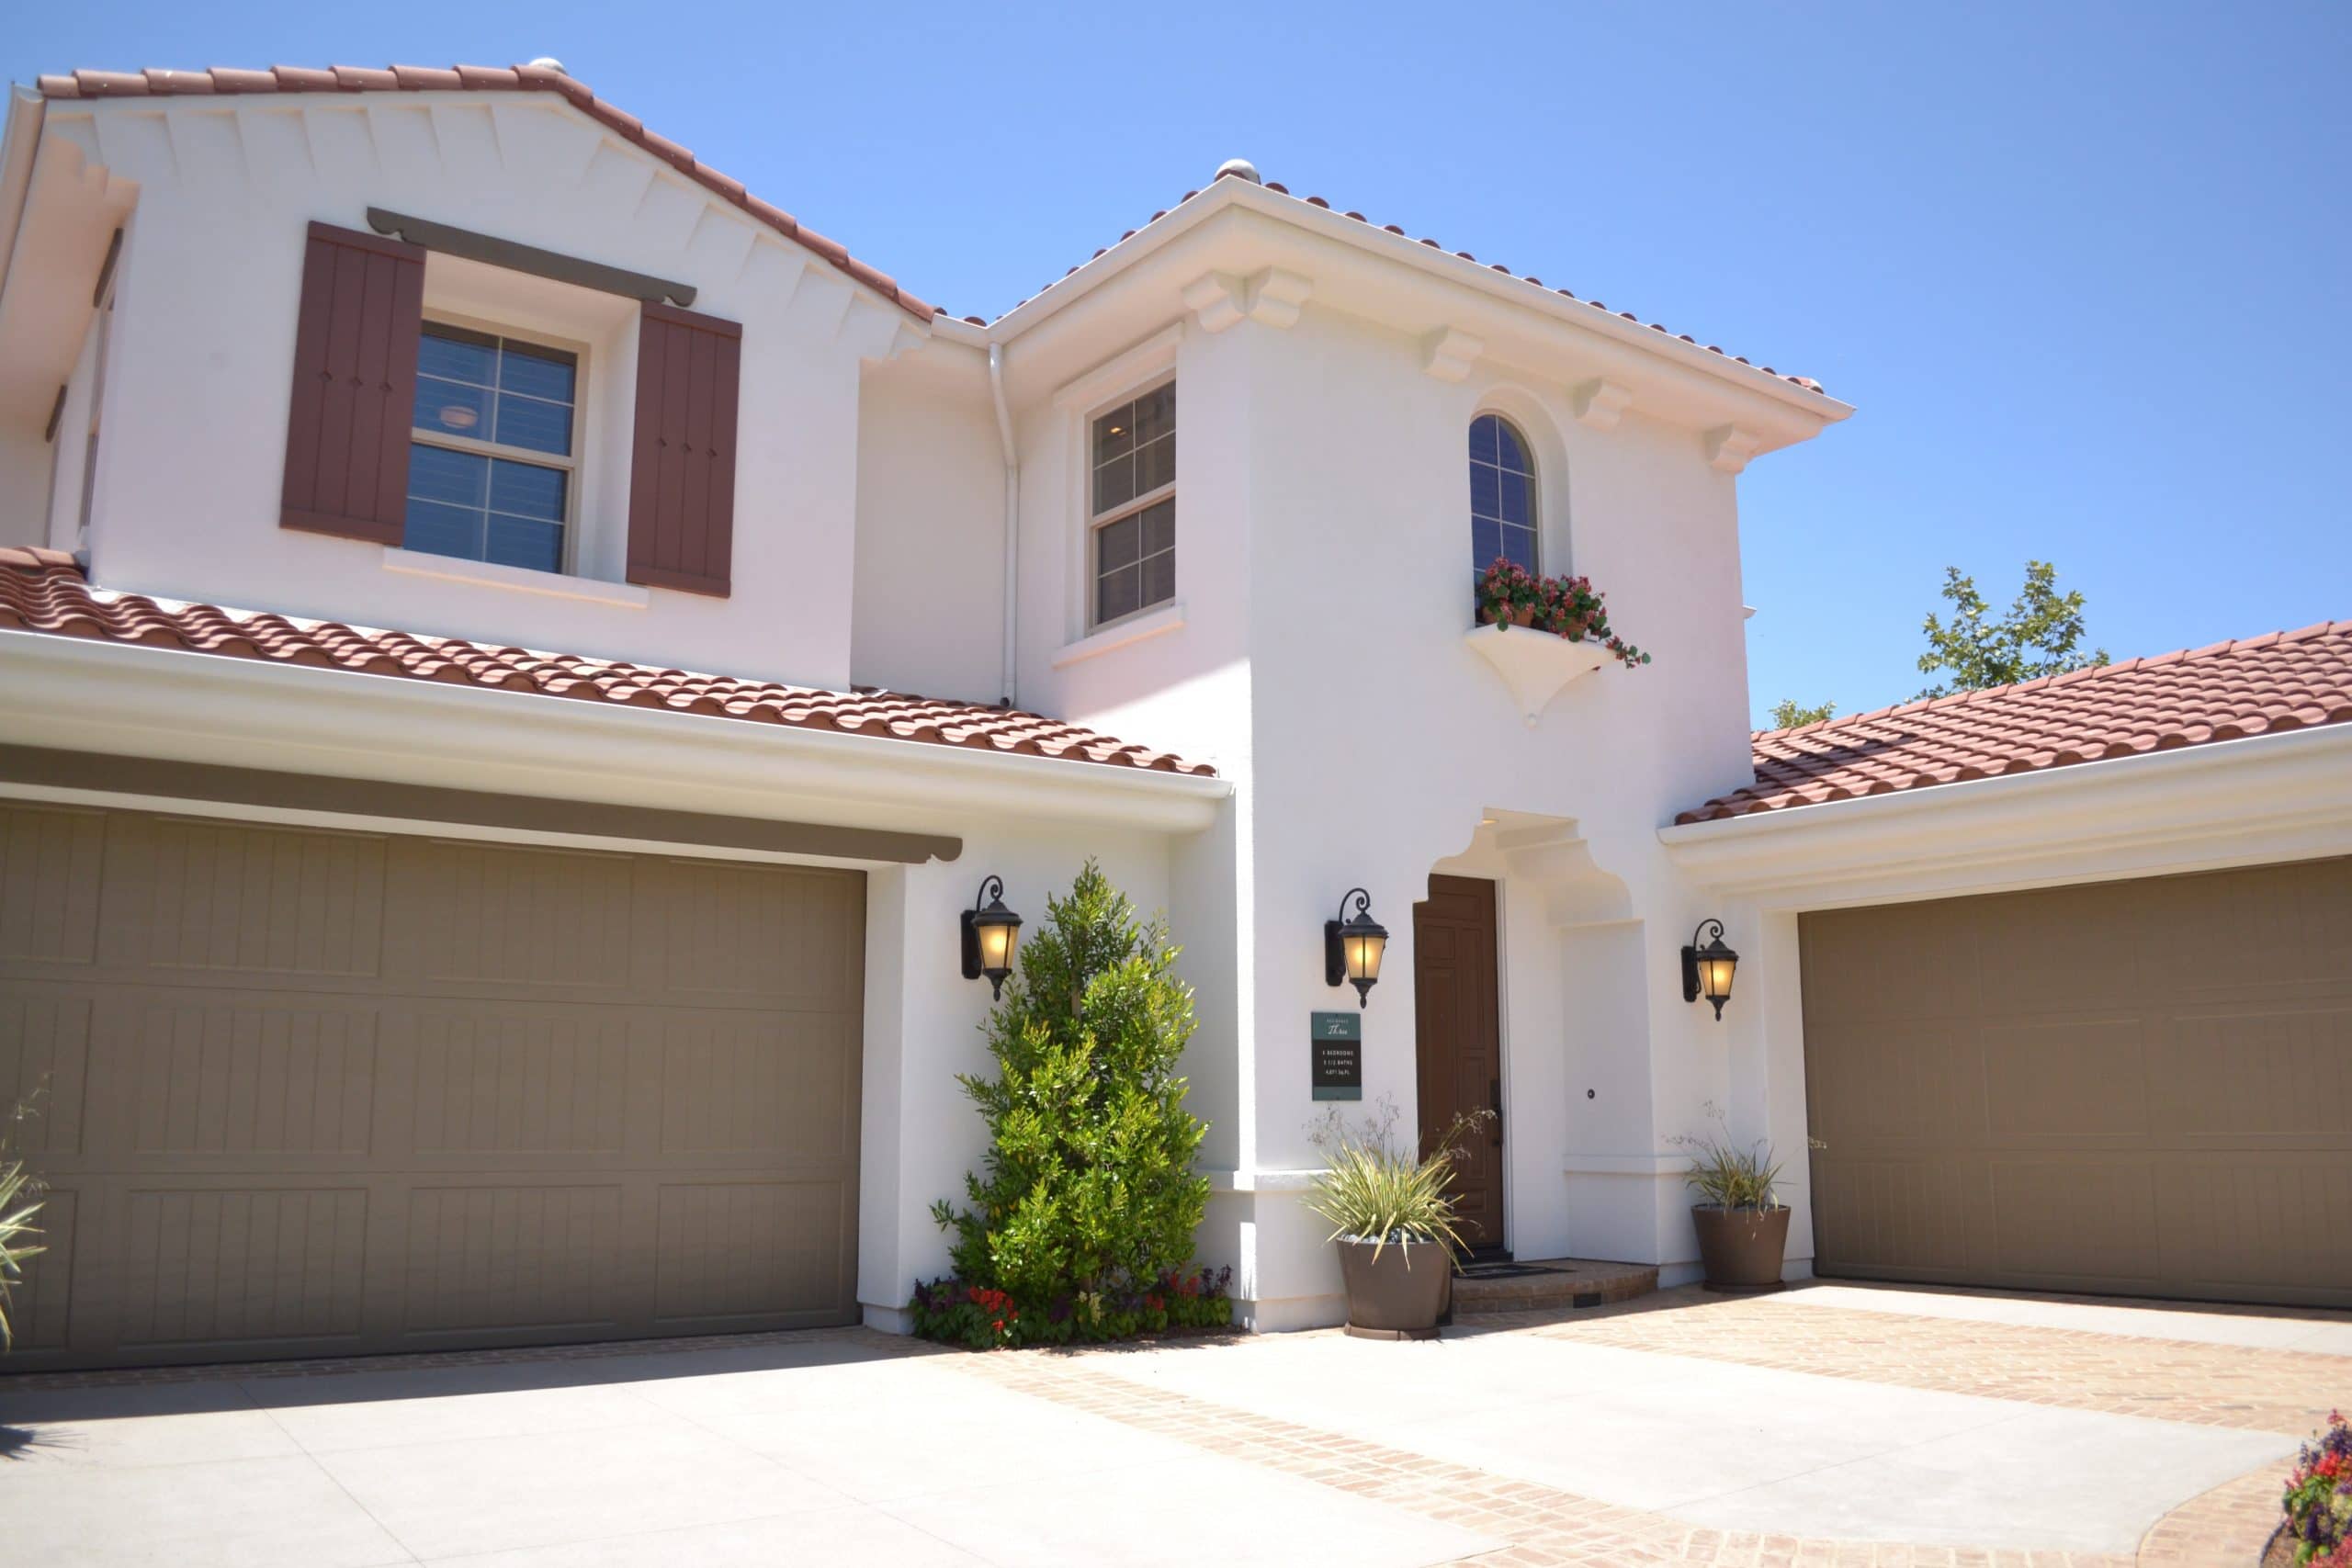 Key Aspects to Consider When Looking for a Las Vegas House for Sale